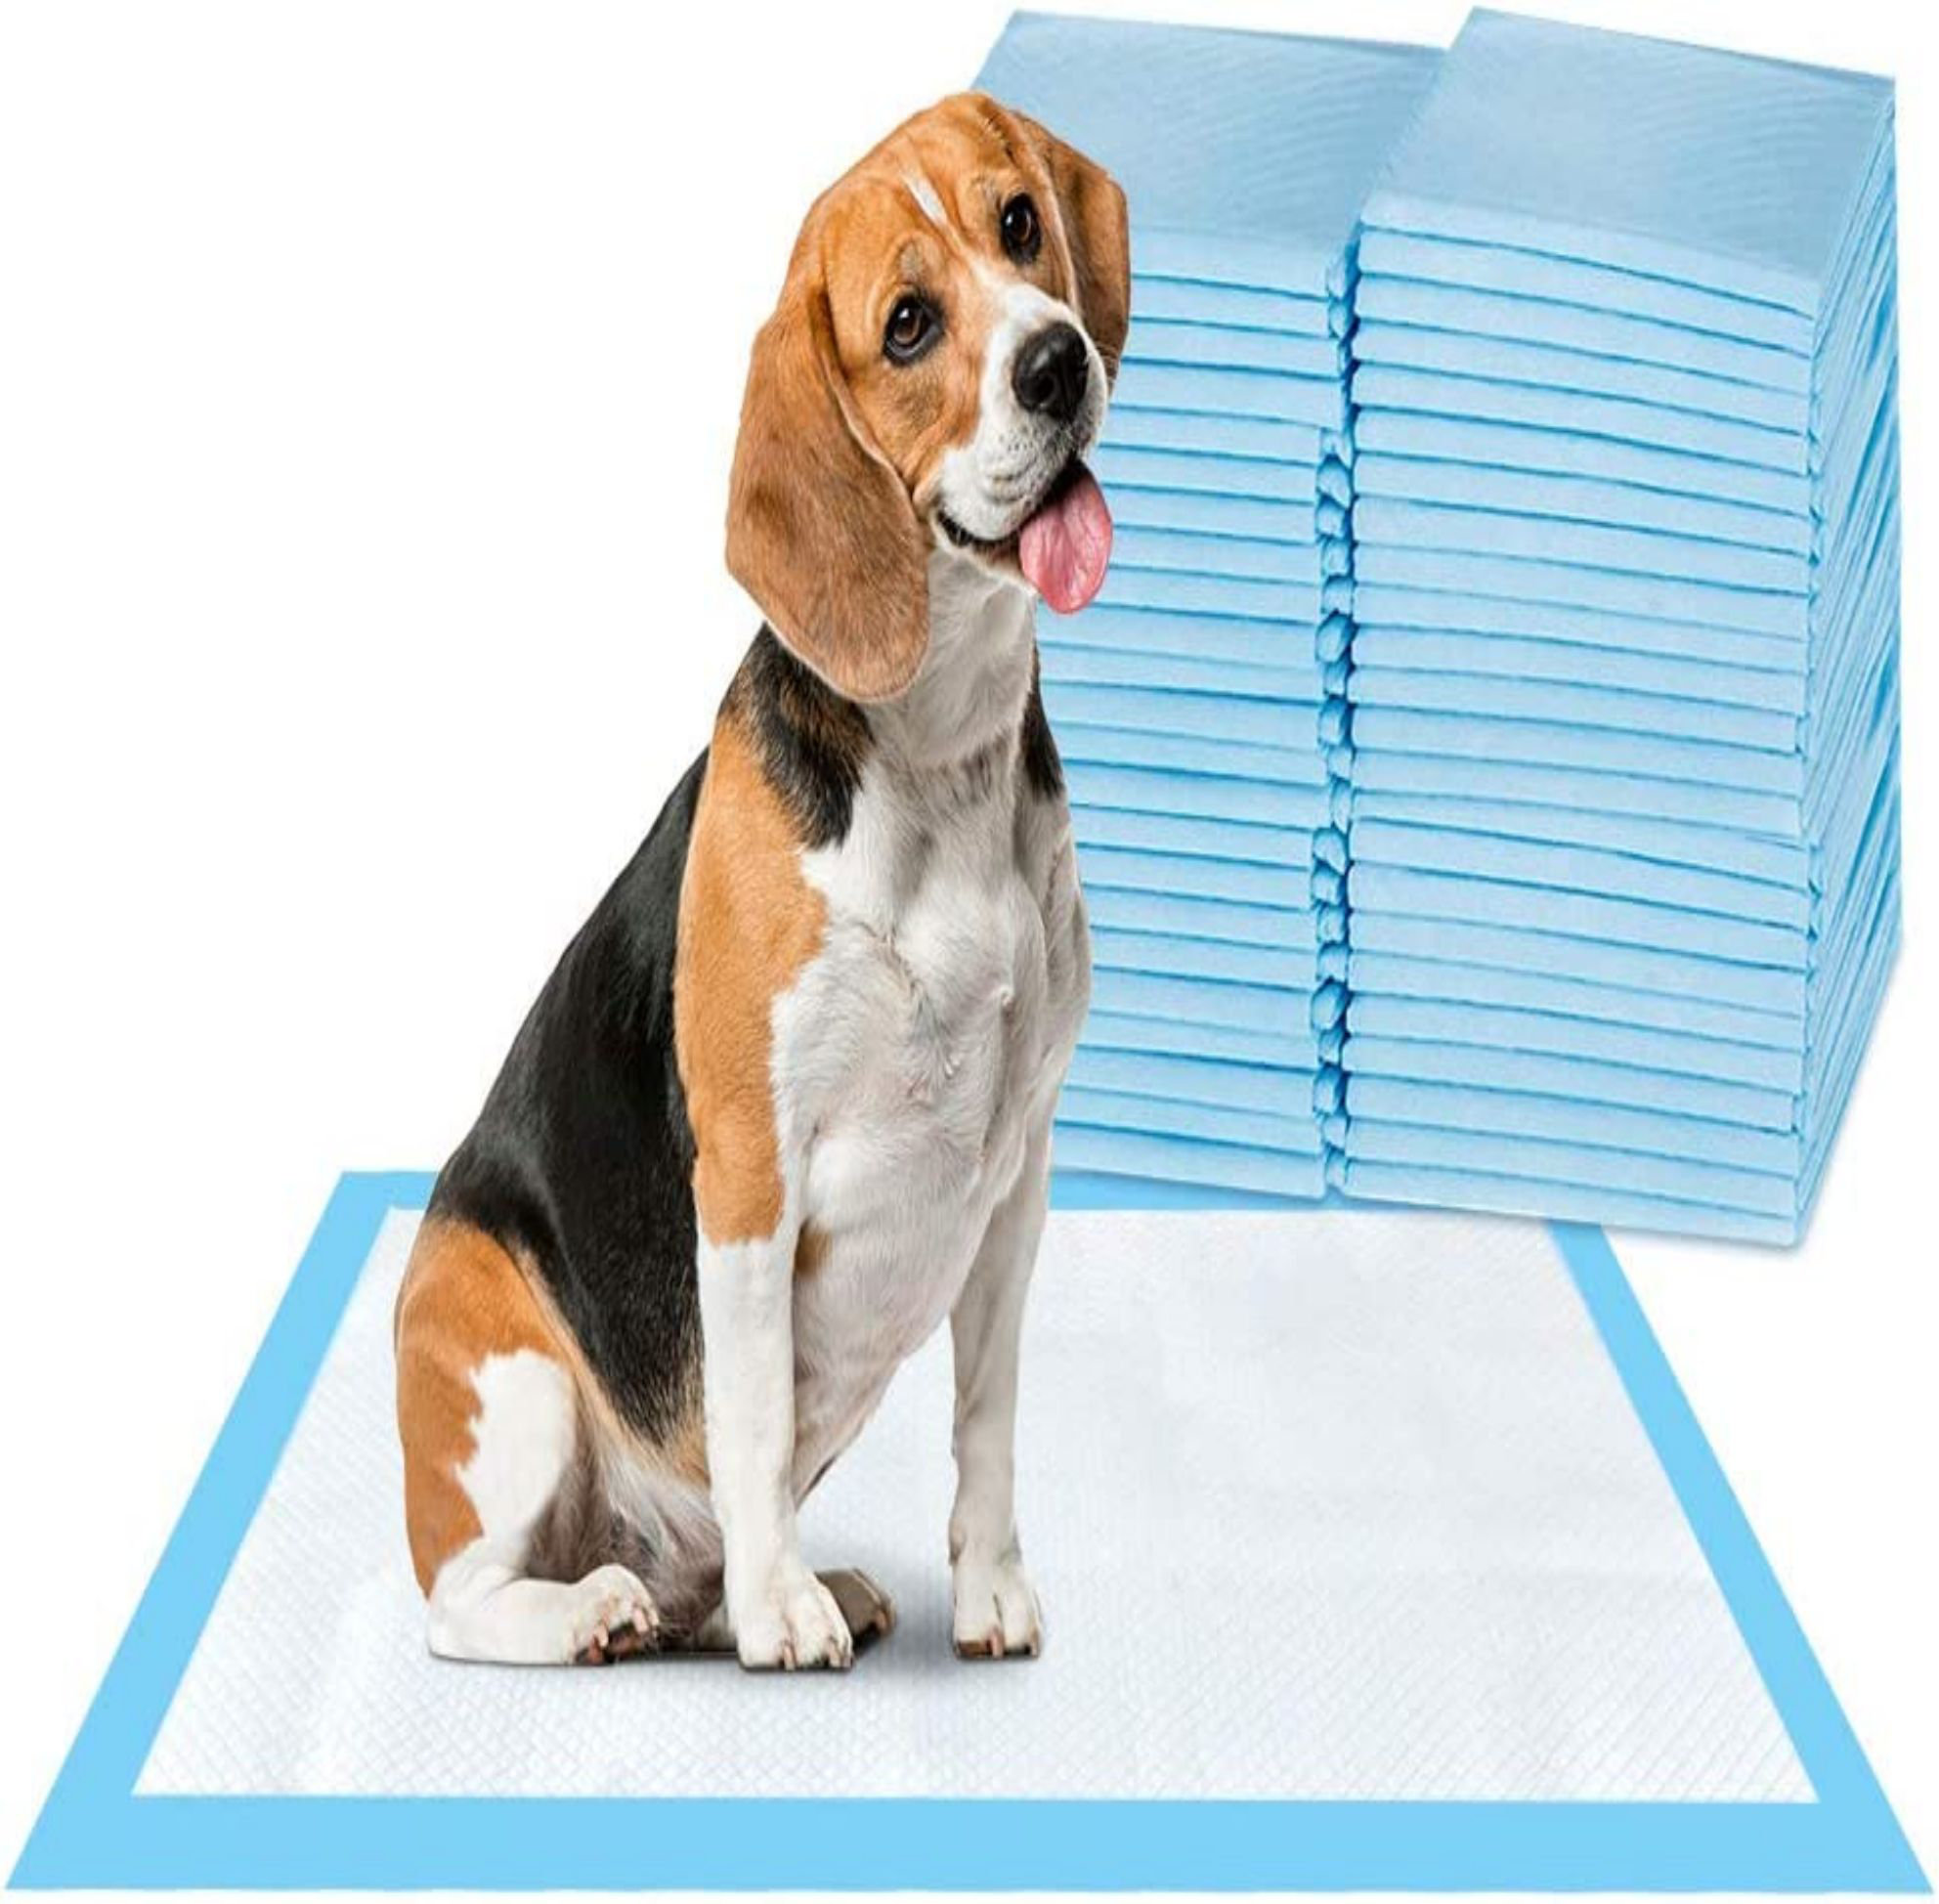 Puppy Training Washable Pee Pads - Heavy Duty, Super Absorbent